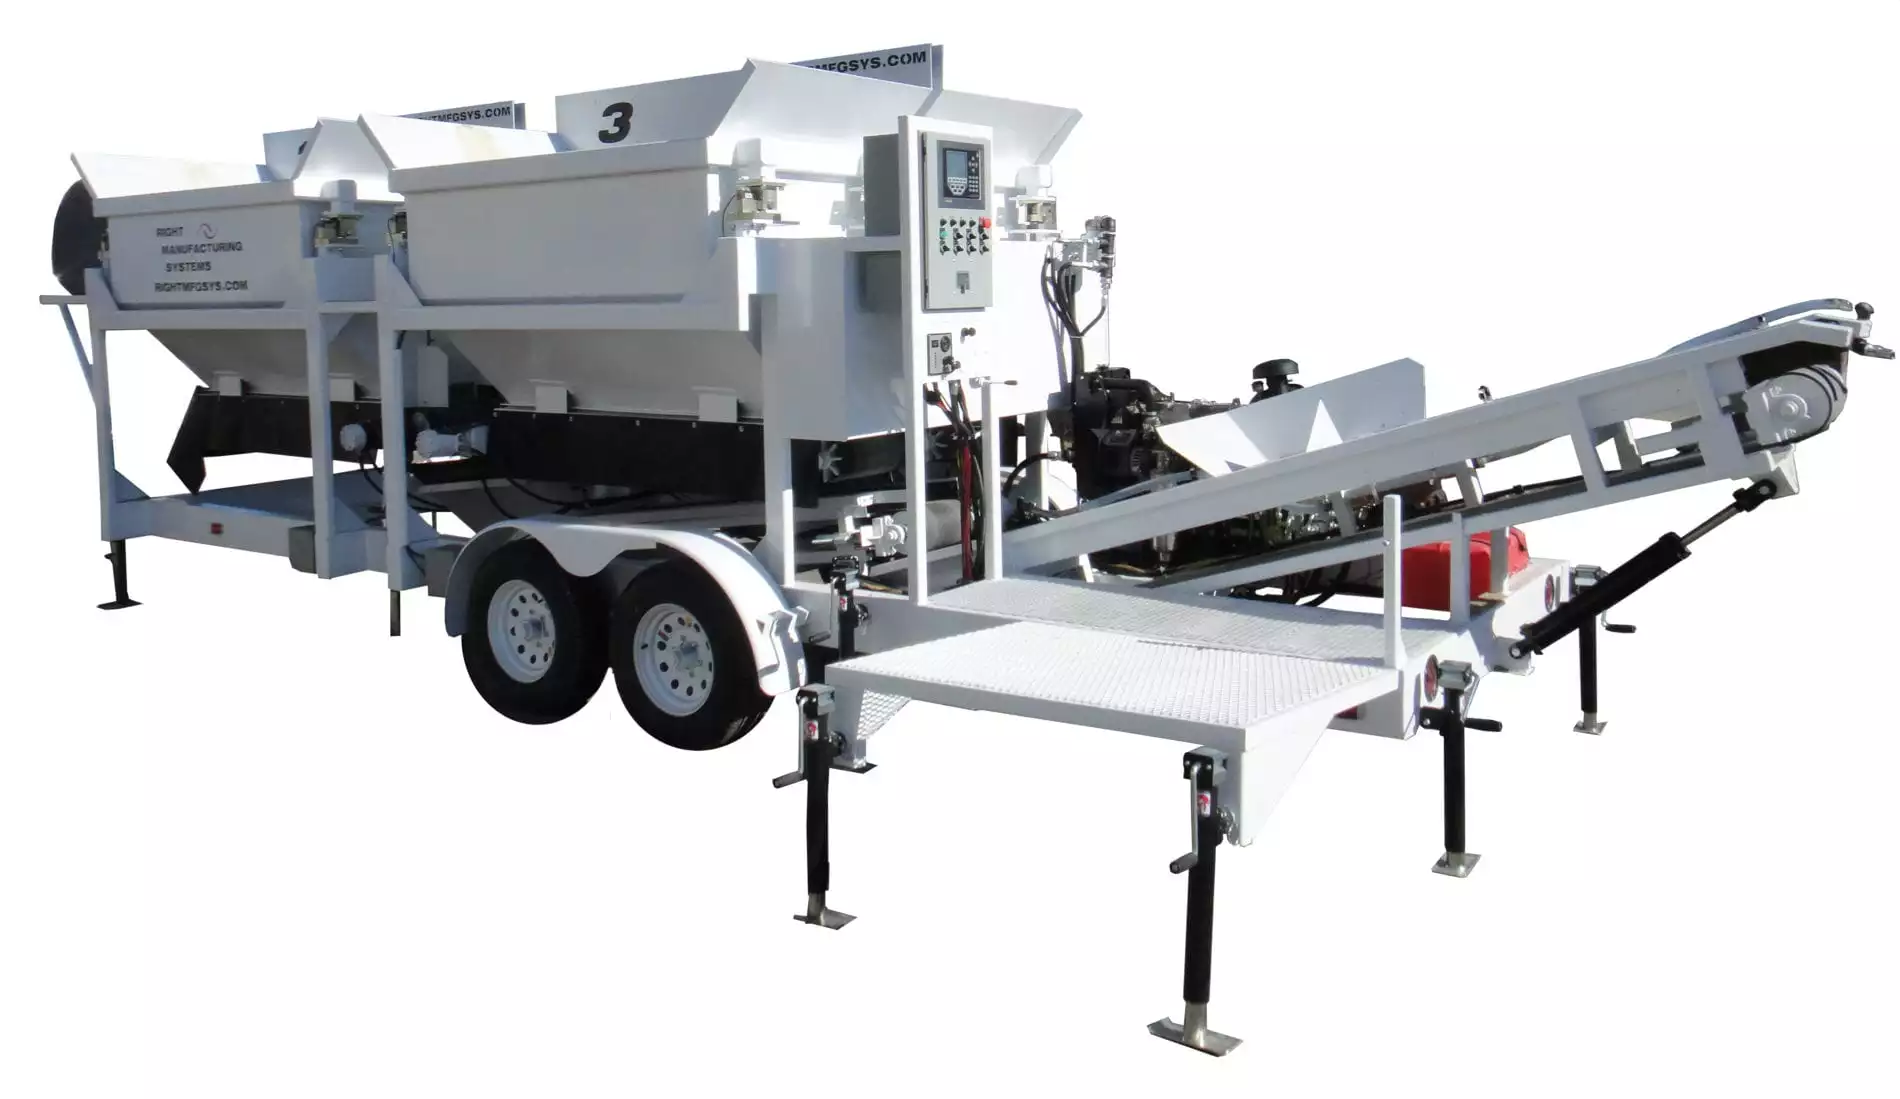 Custom Portable Concrete Batching Plant Mix Right 2CL-5-4 by Right Manufacturing Systems Inc.